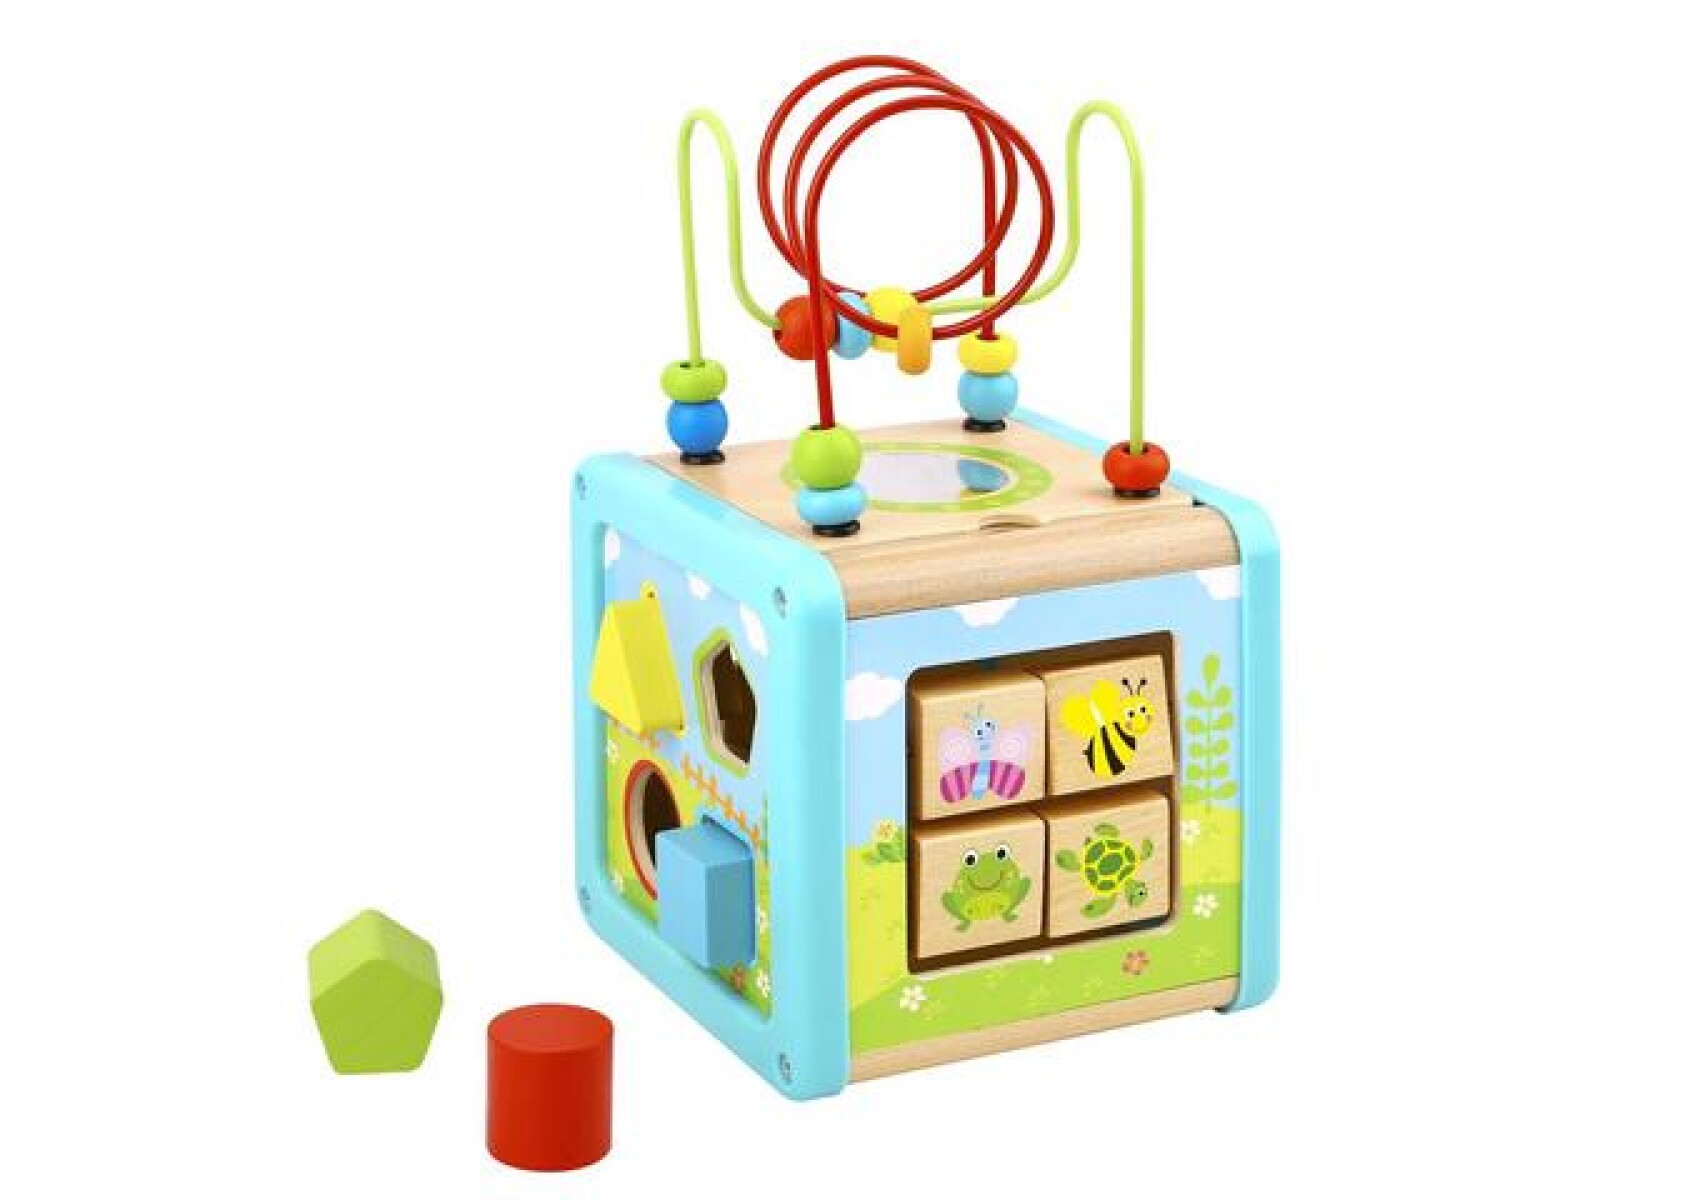 Cubo didáctico Tooky toy 